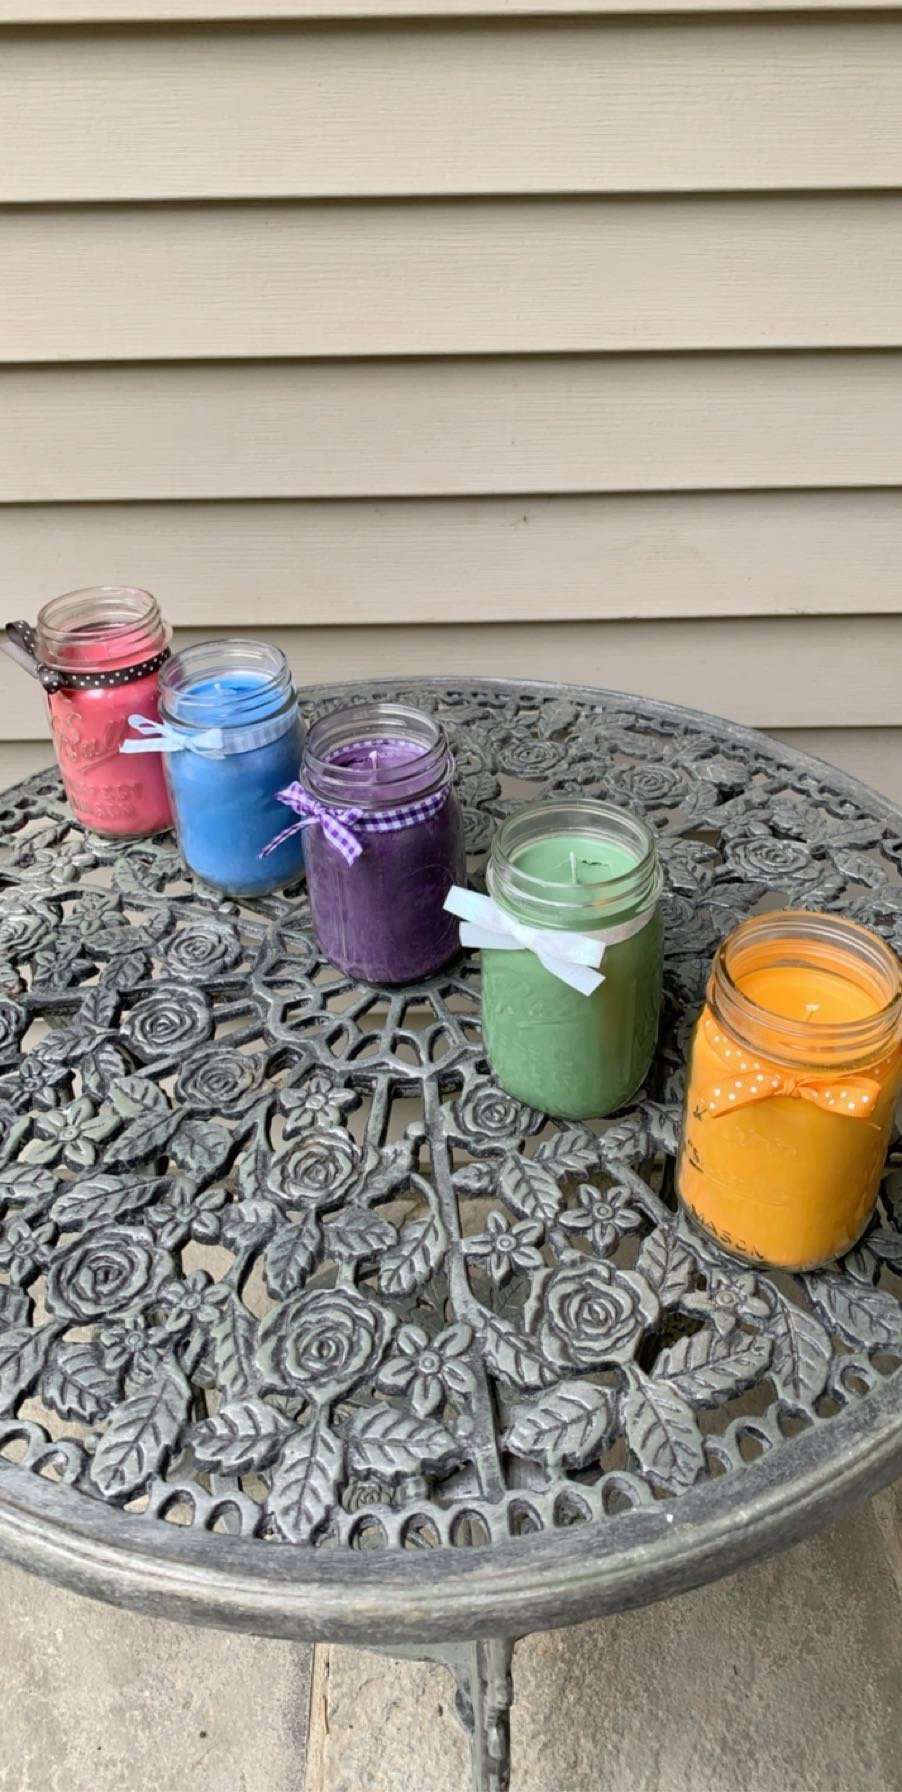 Rainbow Spectrum pint sized candles-soy candles-candles with wicks-mason jar candles-scented candles-spa scents-party favors-housewarming